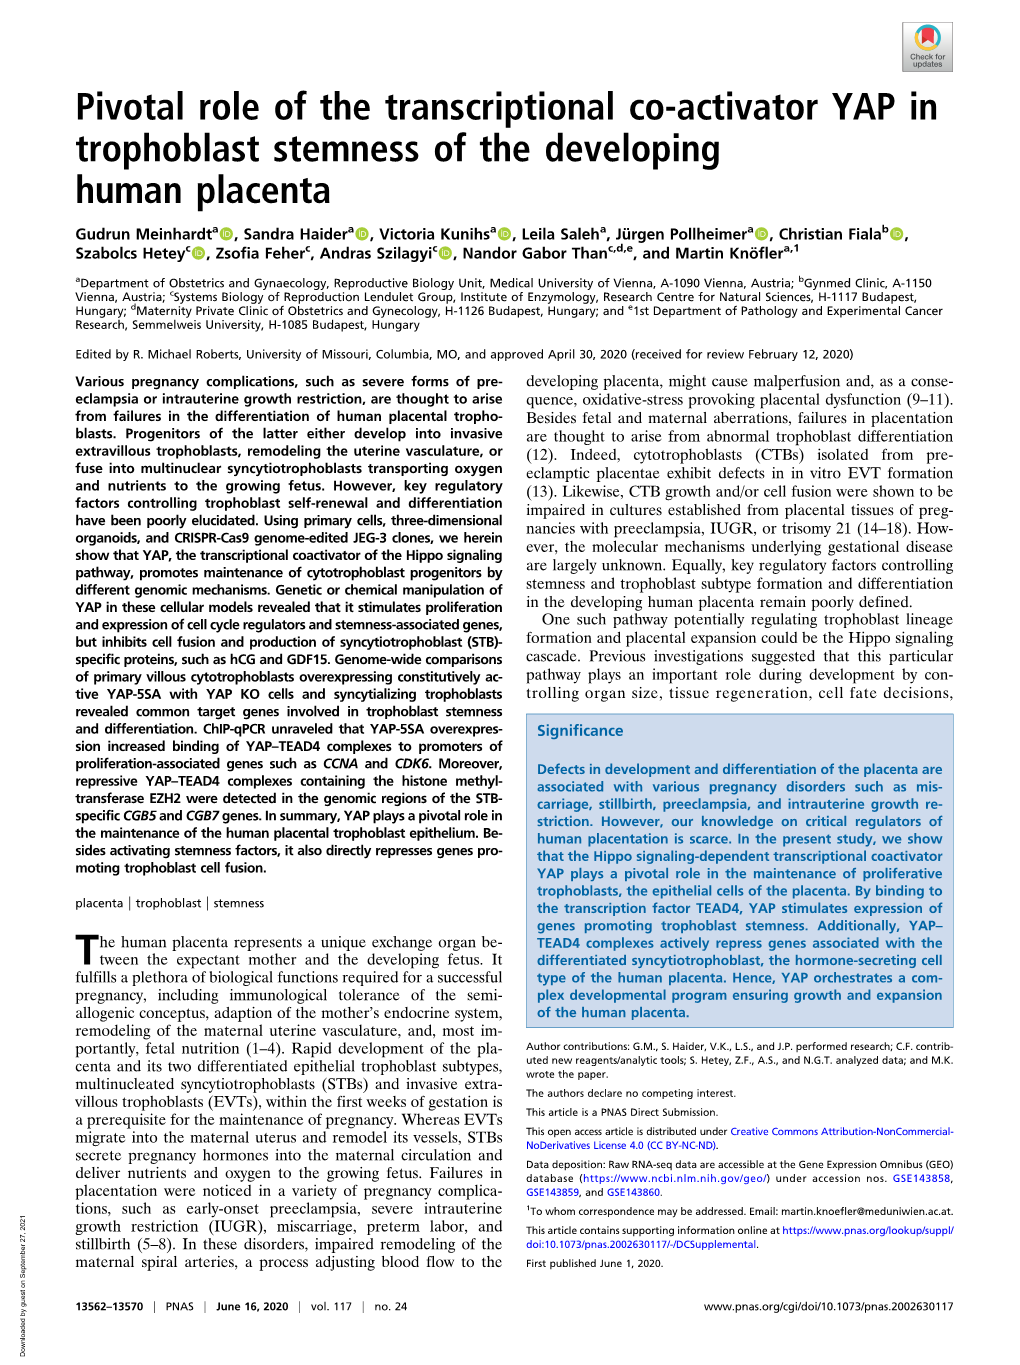 Pivotal Role of the Transcriptional Co-Activator YAP in Trophoblast Stemness of the Developing Human Placenta